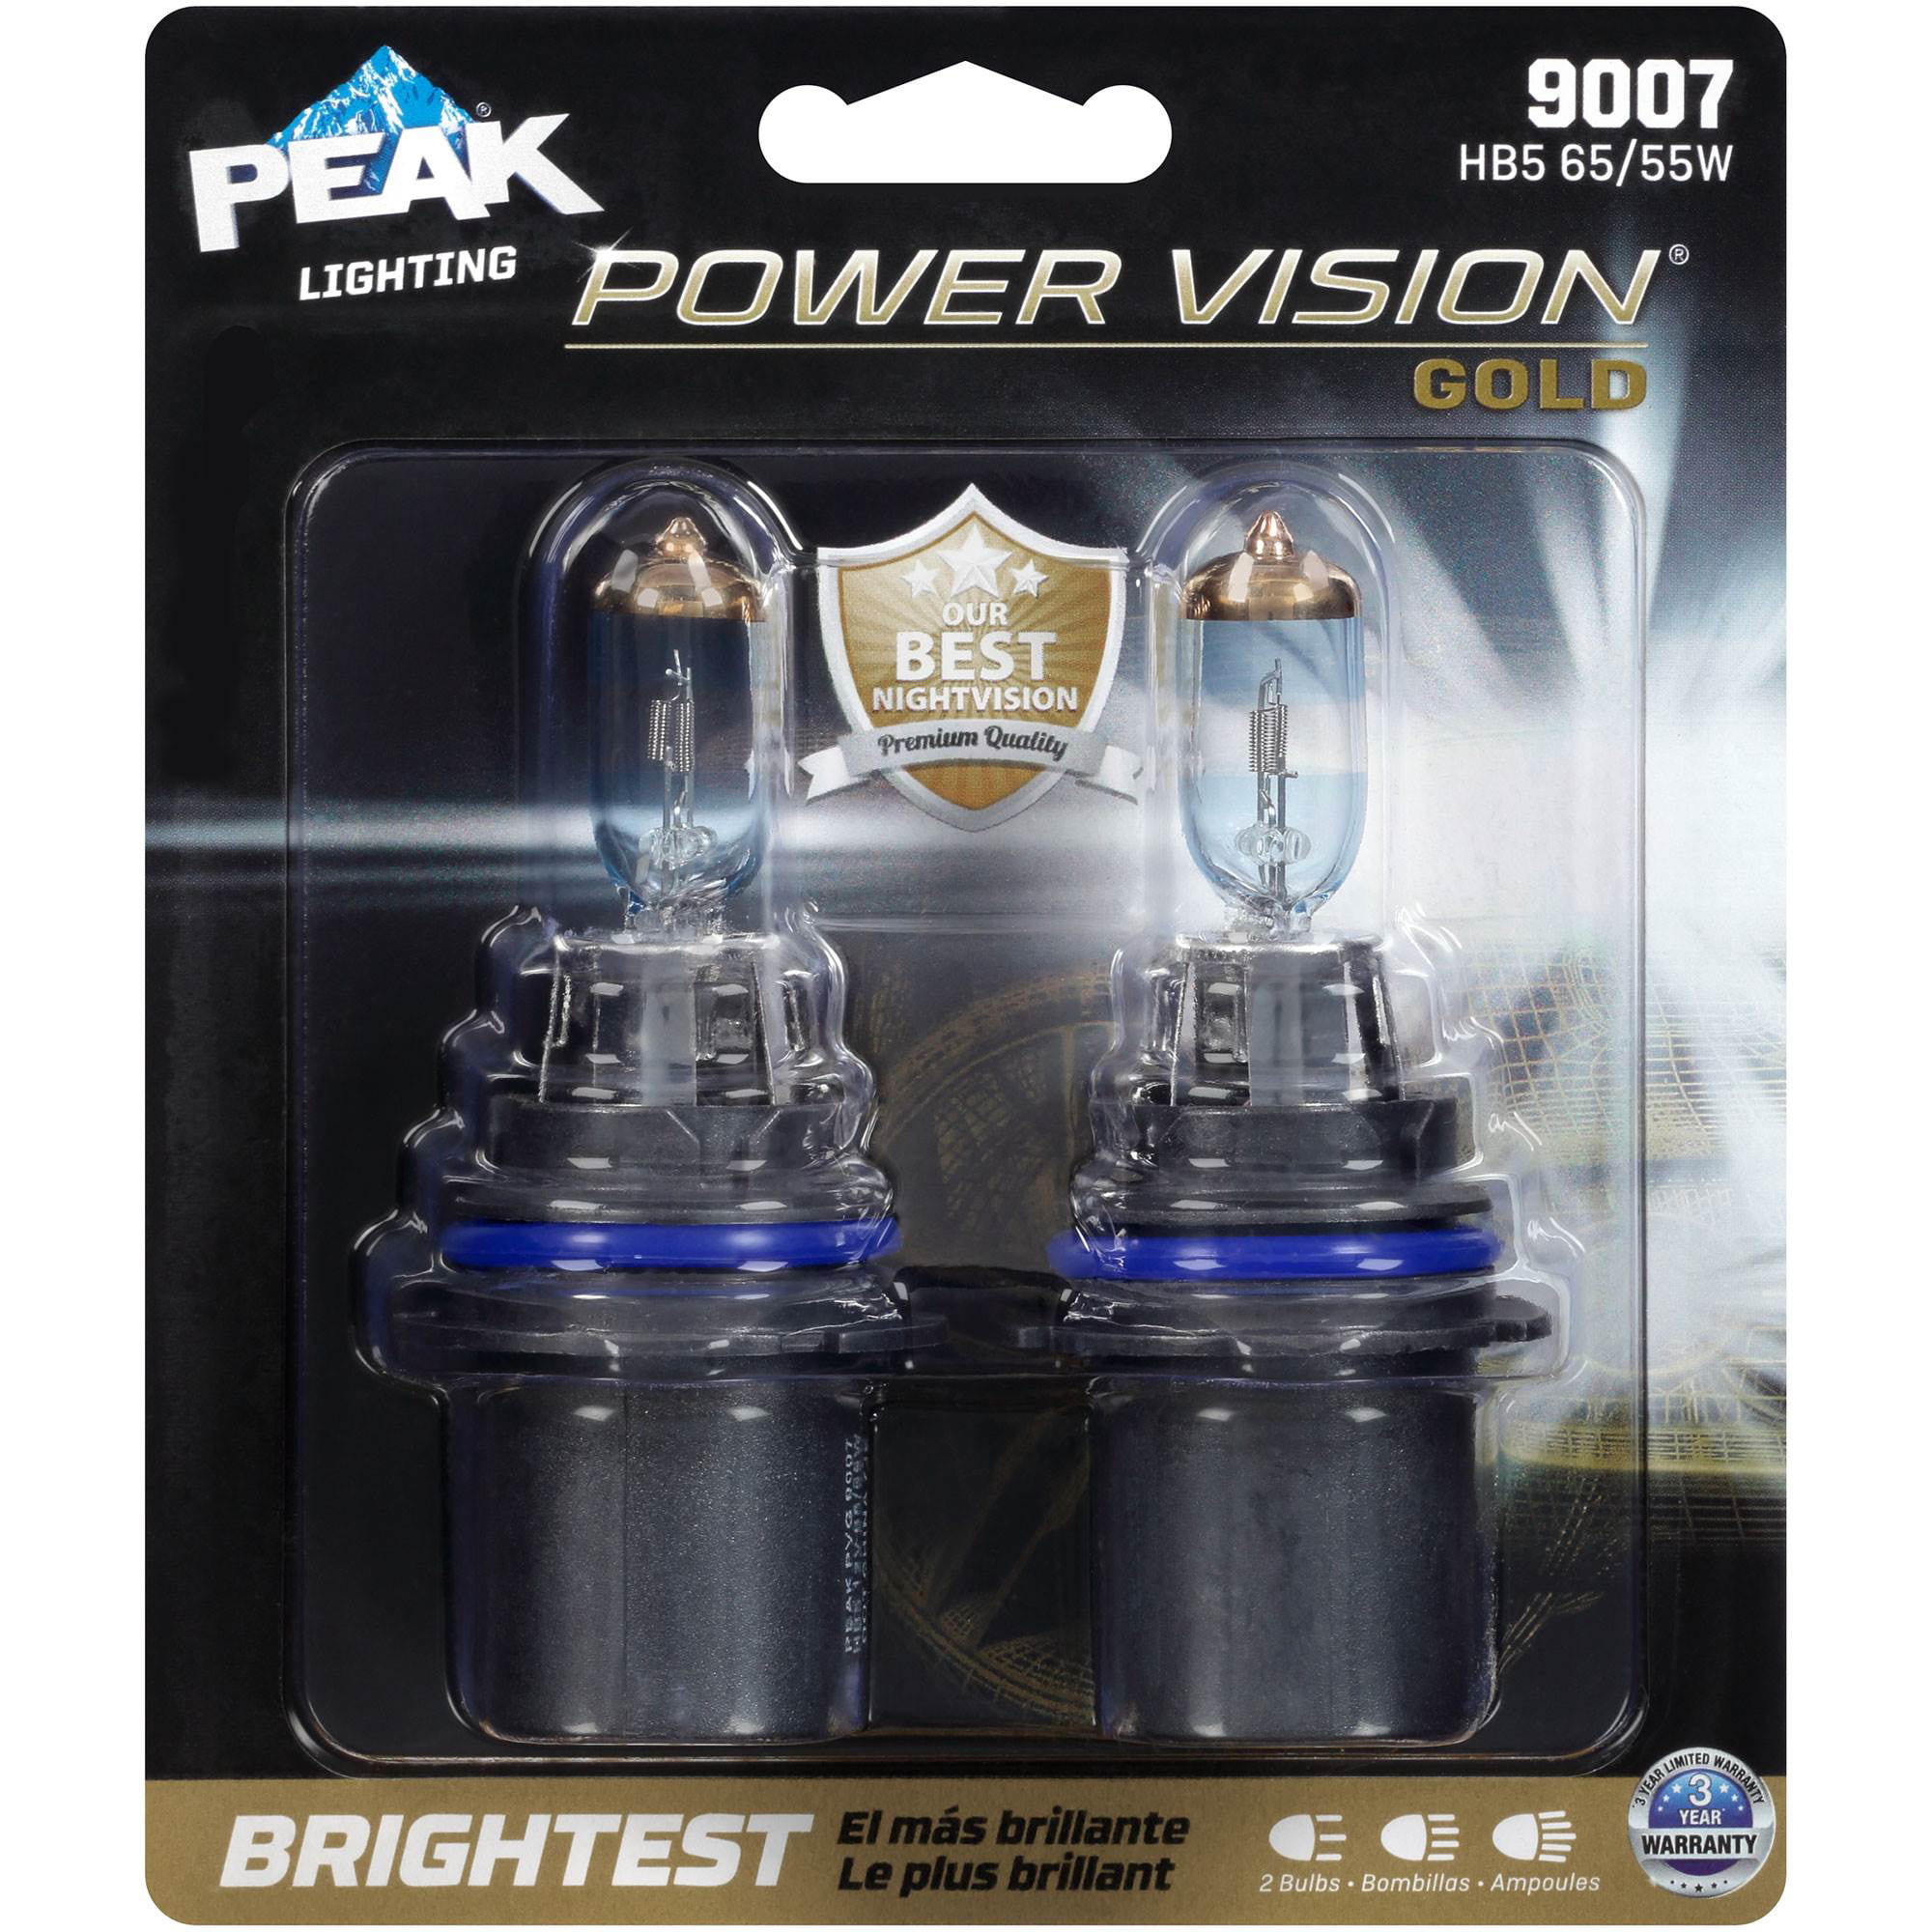 8020201 Power Vision Gold Automotive Bulb - 9007 Hb5 65 & 55w - Pack Of 2